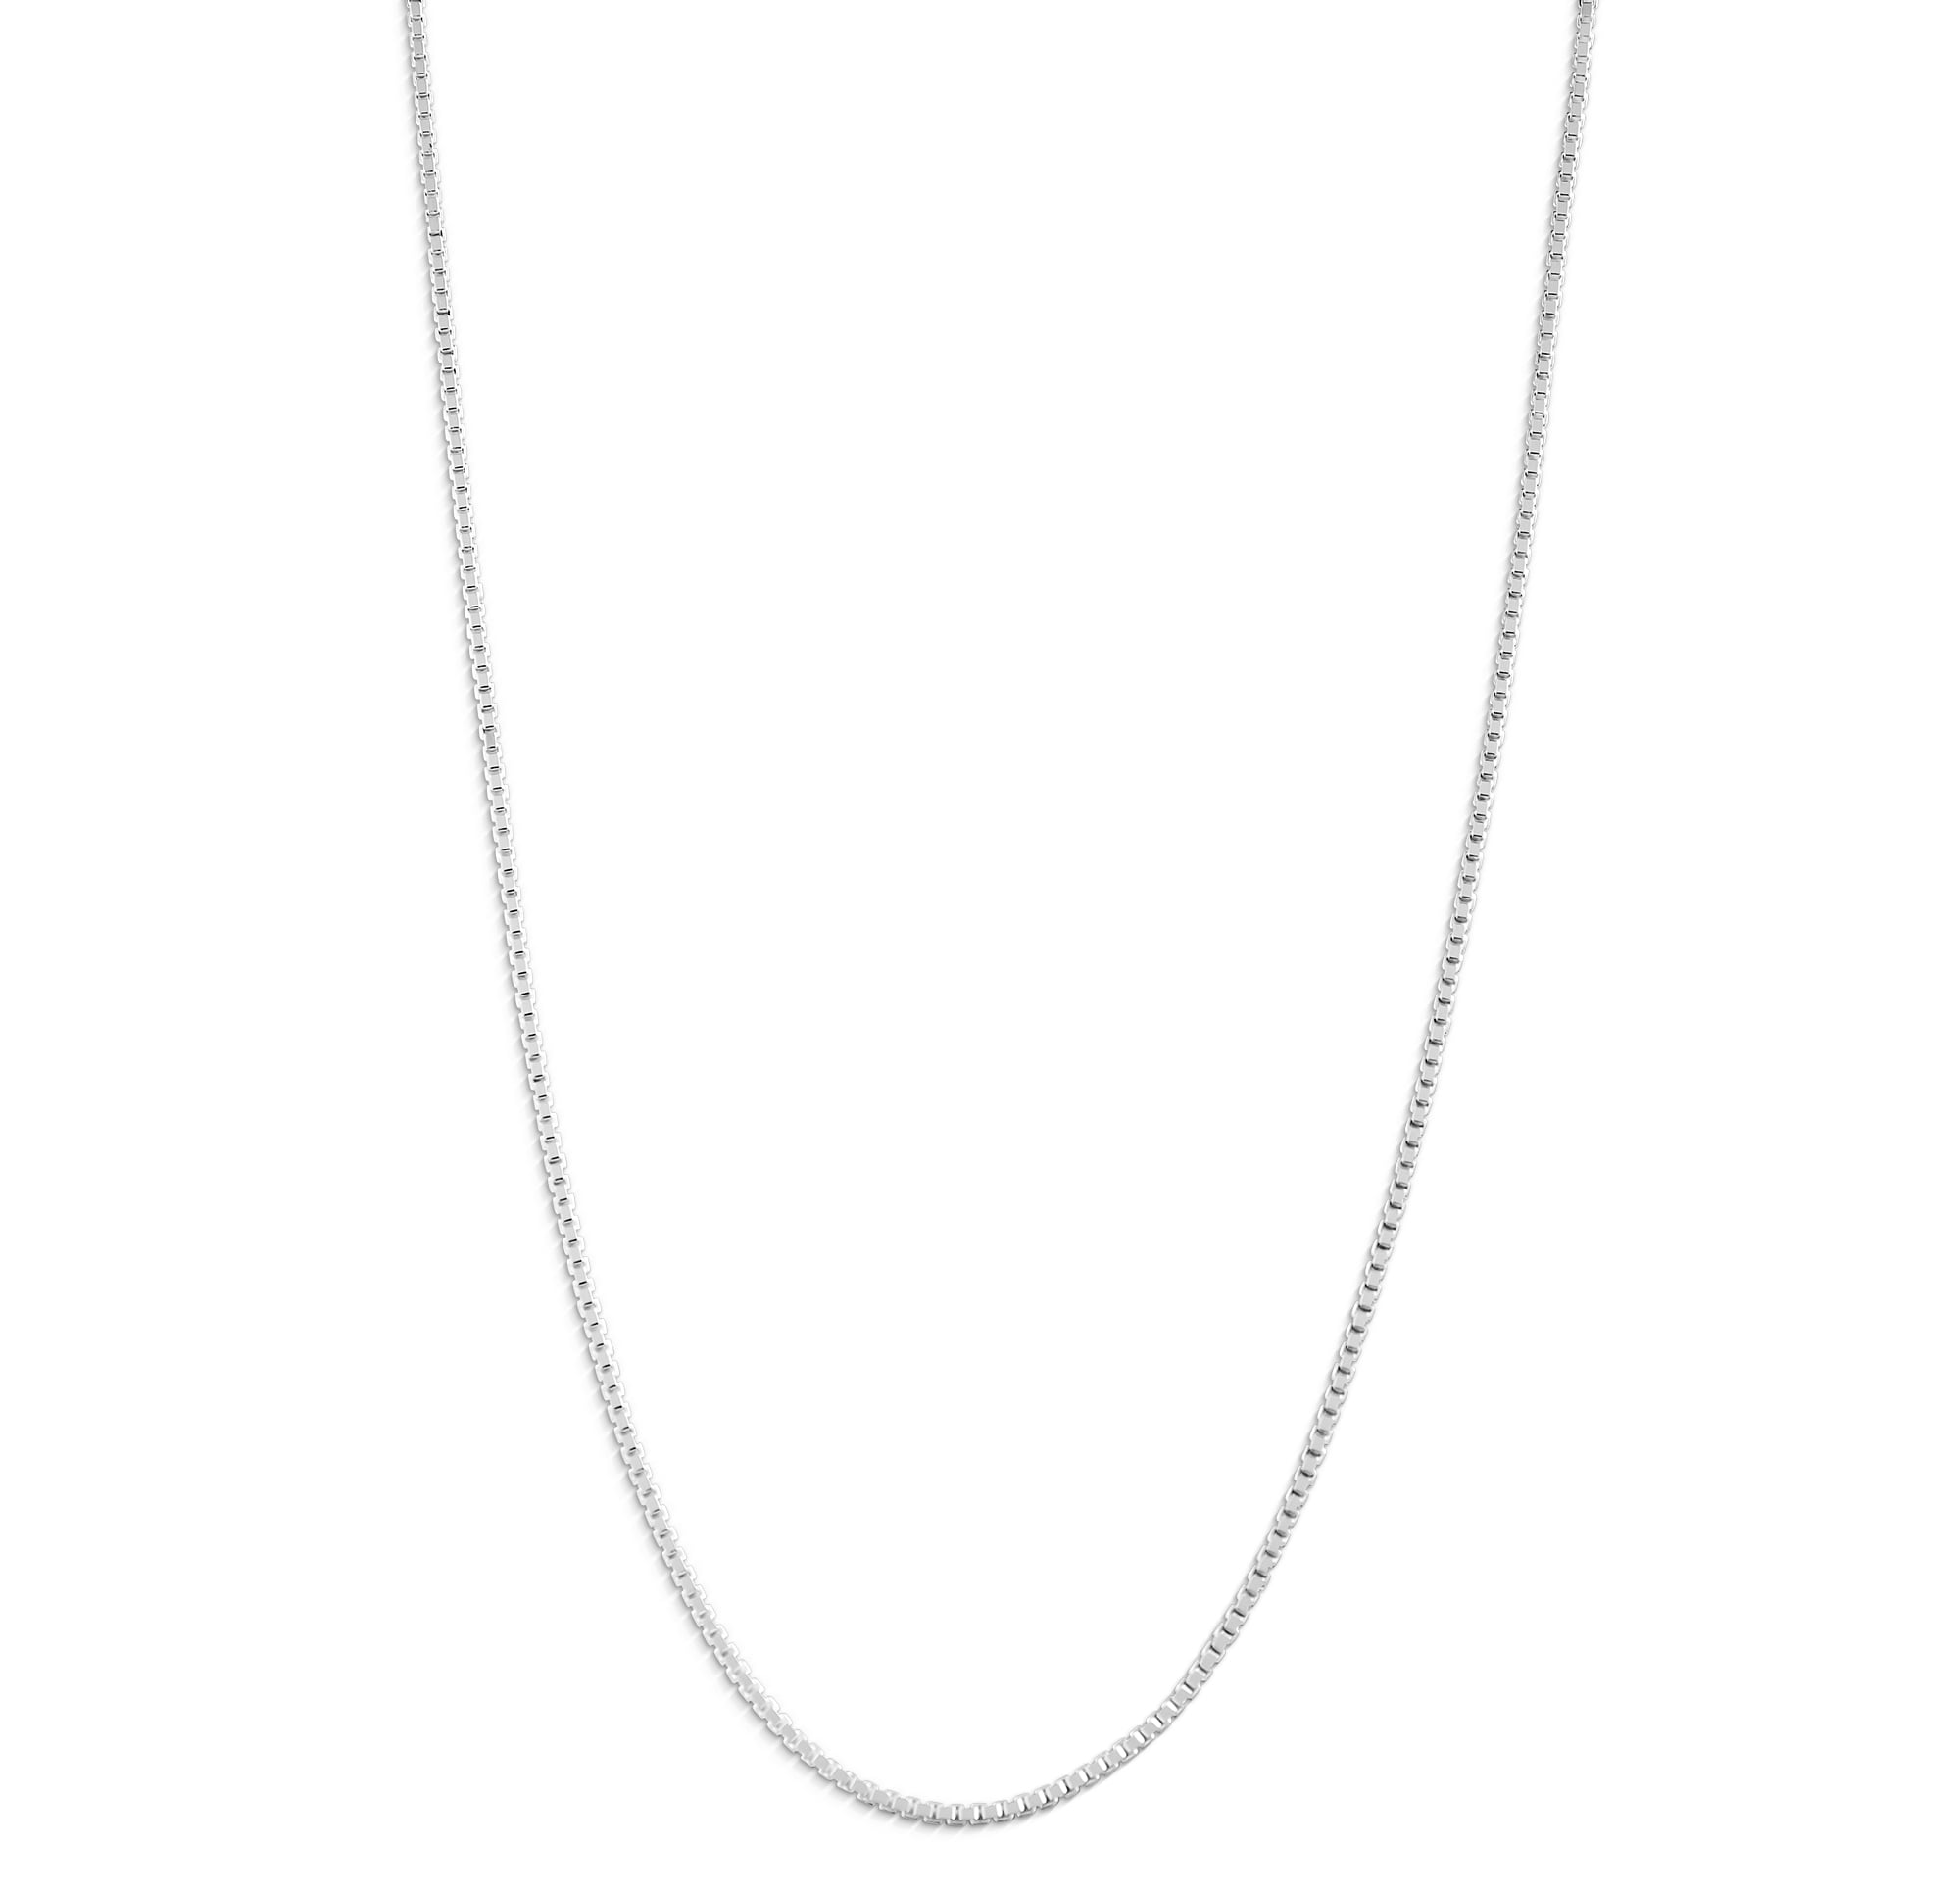 1mm Box Chain Necklace Sterling Silver 925 stamped 24 Inch With Gift Bag bxS bk 